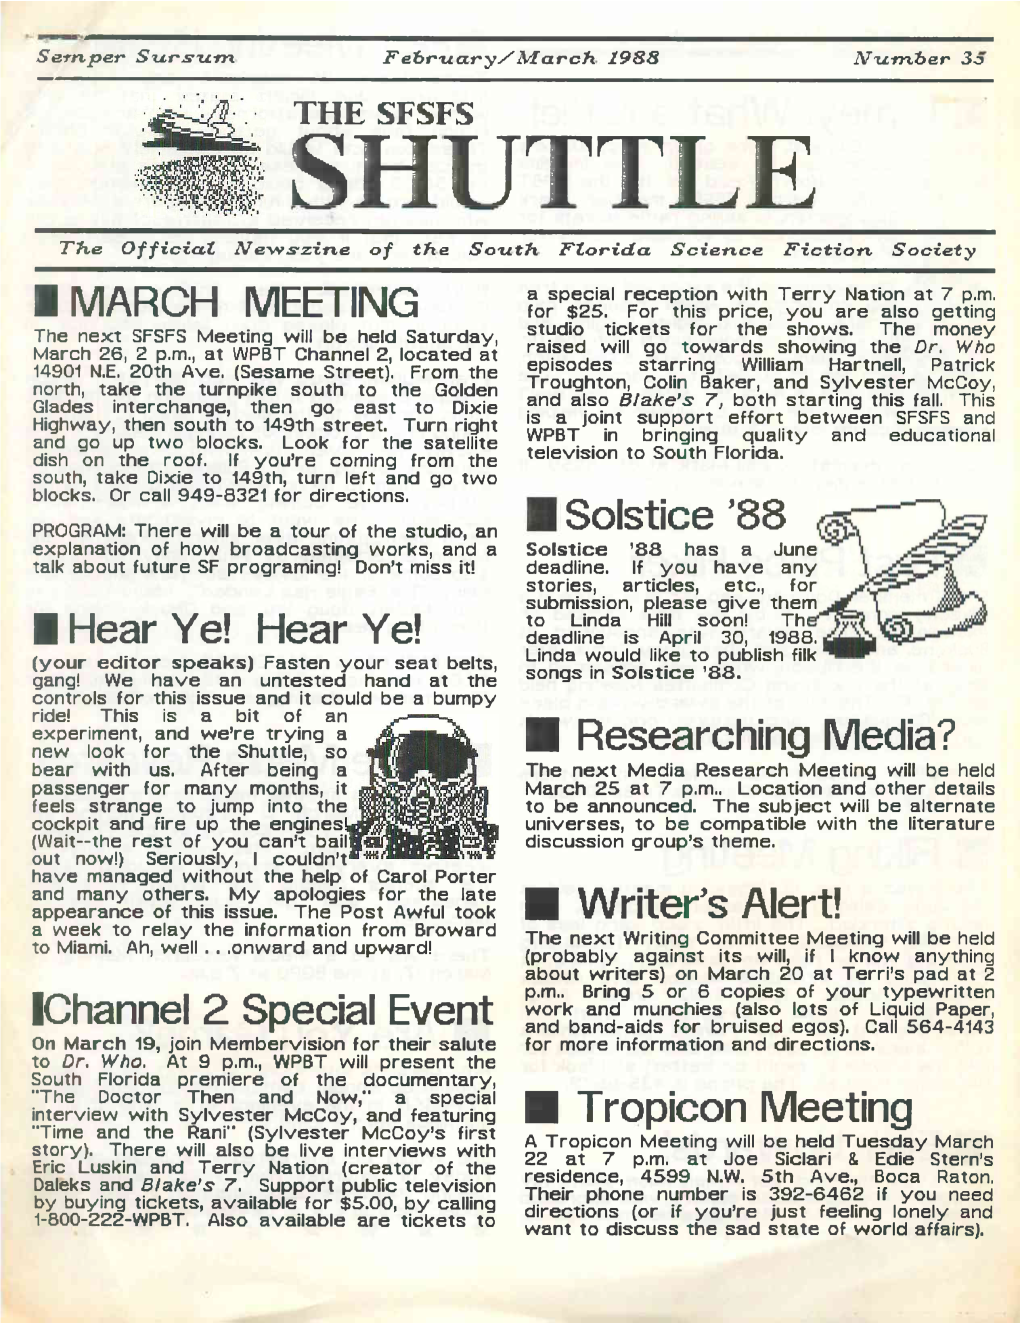 SHUTTLE Ttte Official Nevrs'zine of the South Florida Science Fiction Society